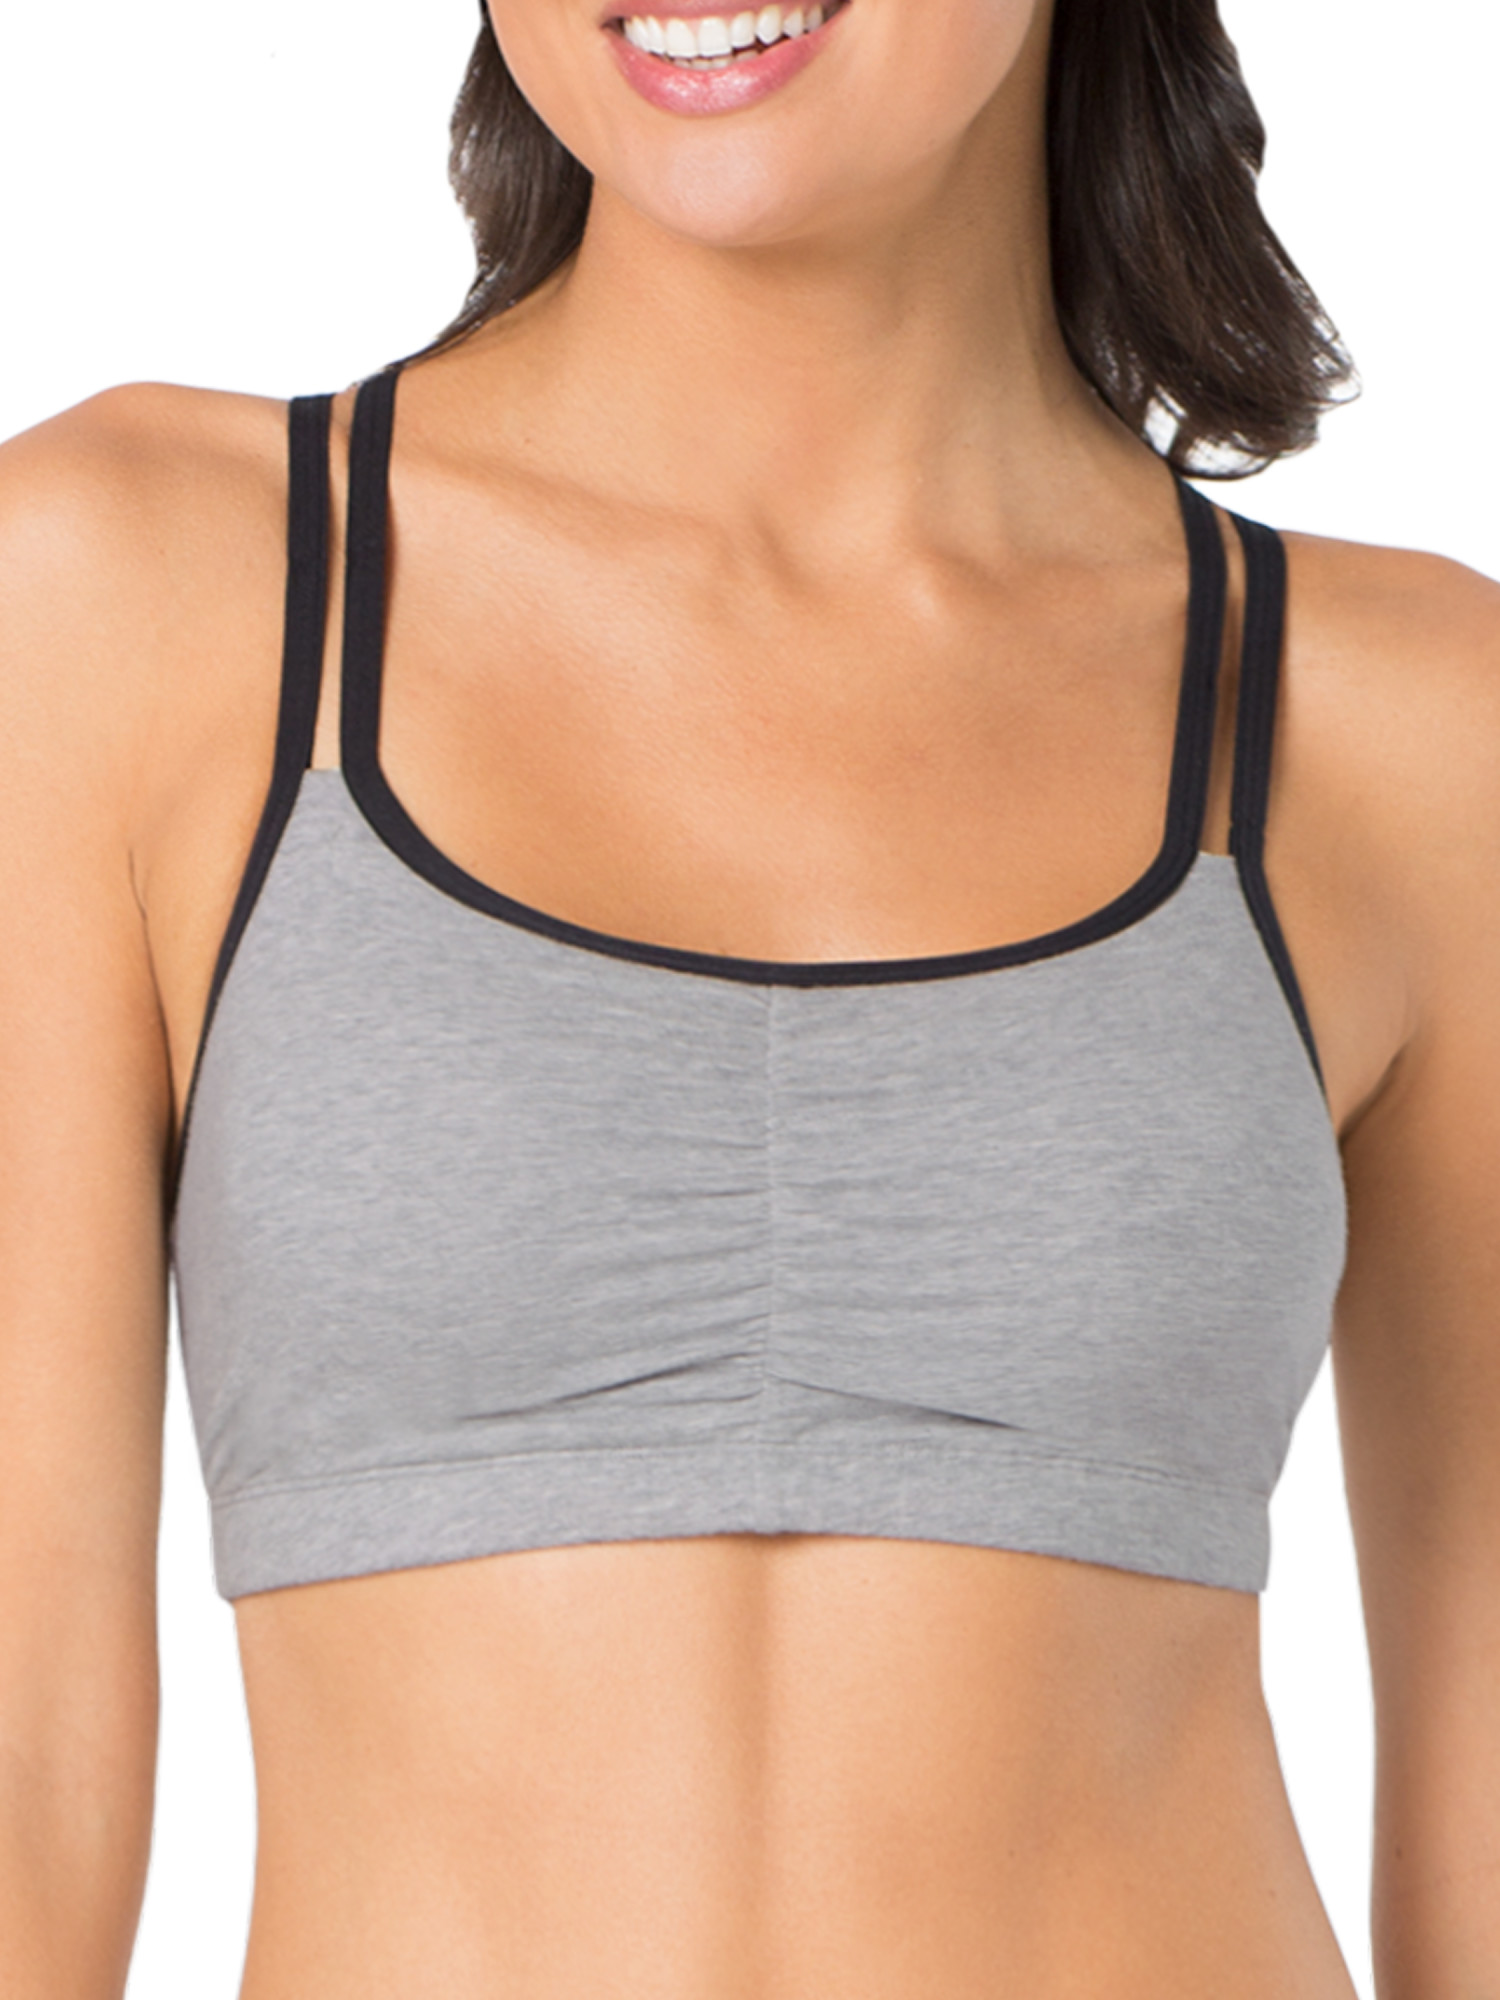 Fruit of the Loom Women's Spaghetti Strap Cotton Sports Bra, 3-Pack, Style-9036 - image 3 of 8